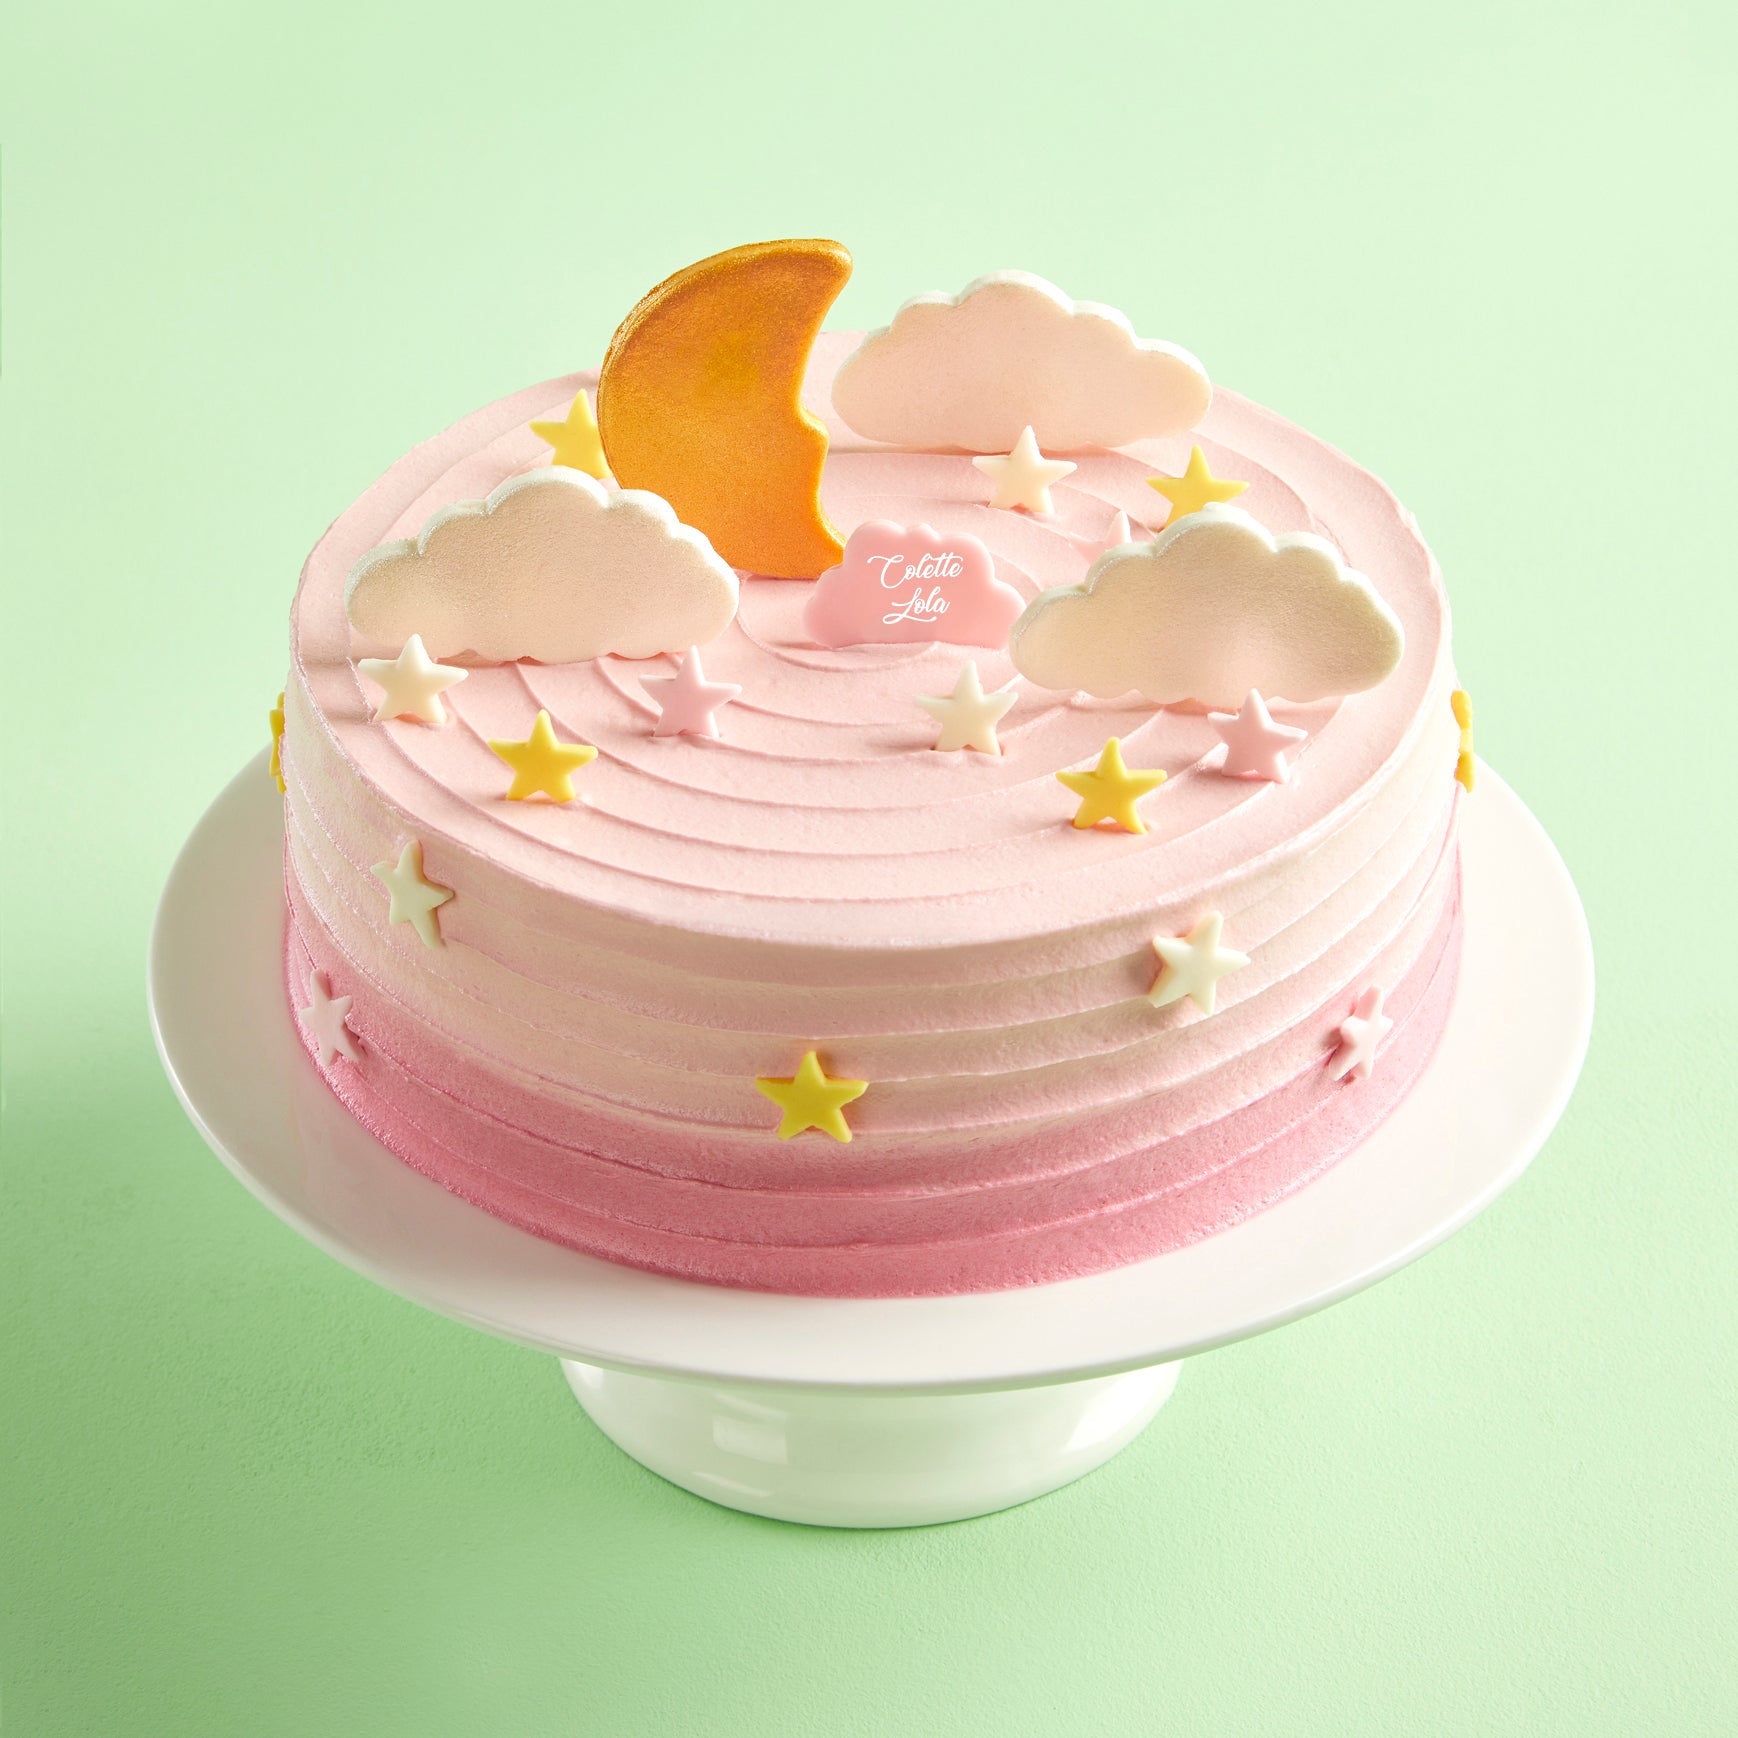 Signature Cake - Special Cake Collection | Colette Lola